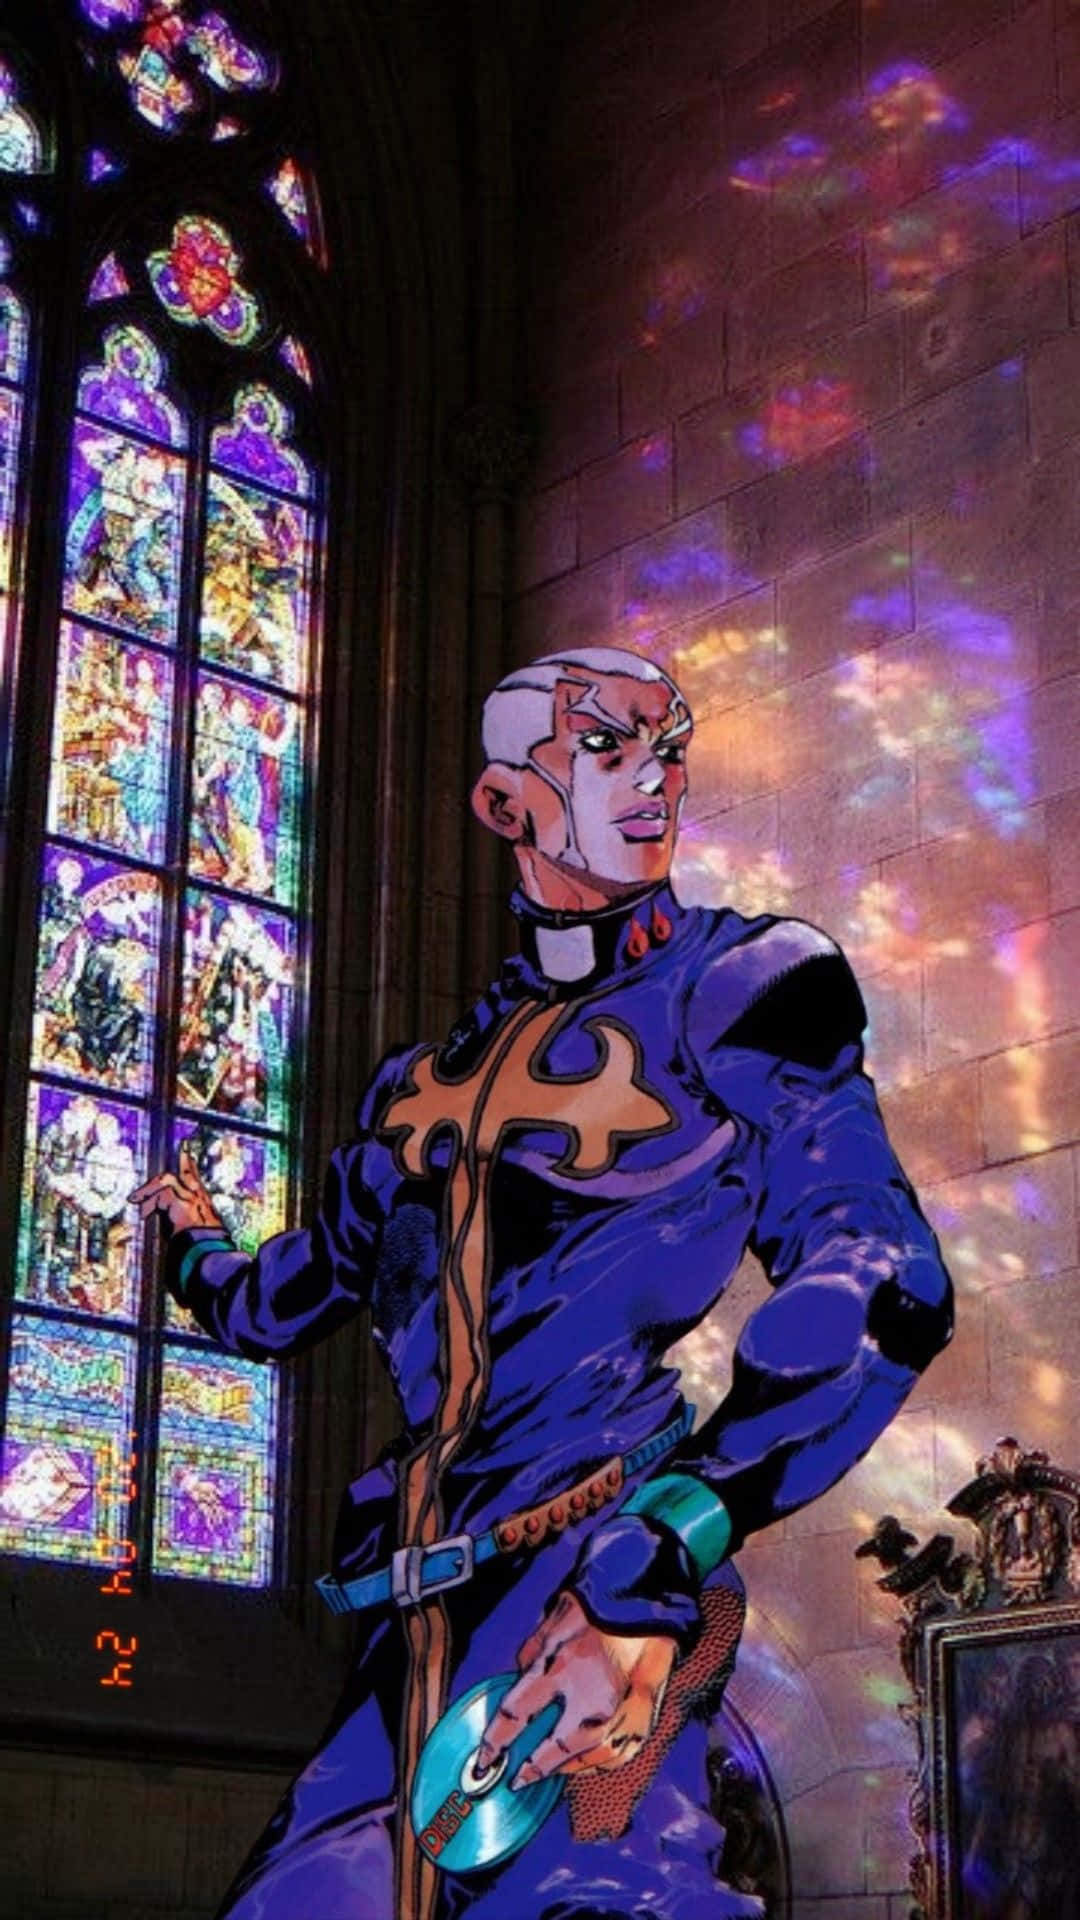 An Iconic Image of Enrico Pucci from the Anime Series "Jojo's Bizarre Adventure" Wallpaper